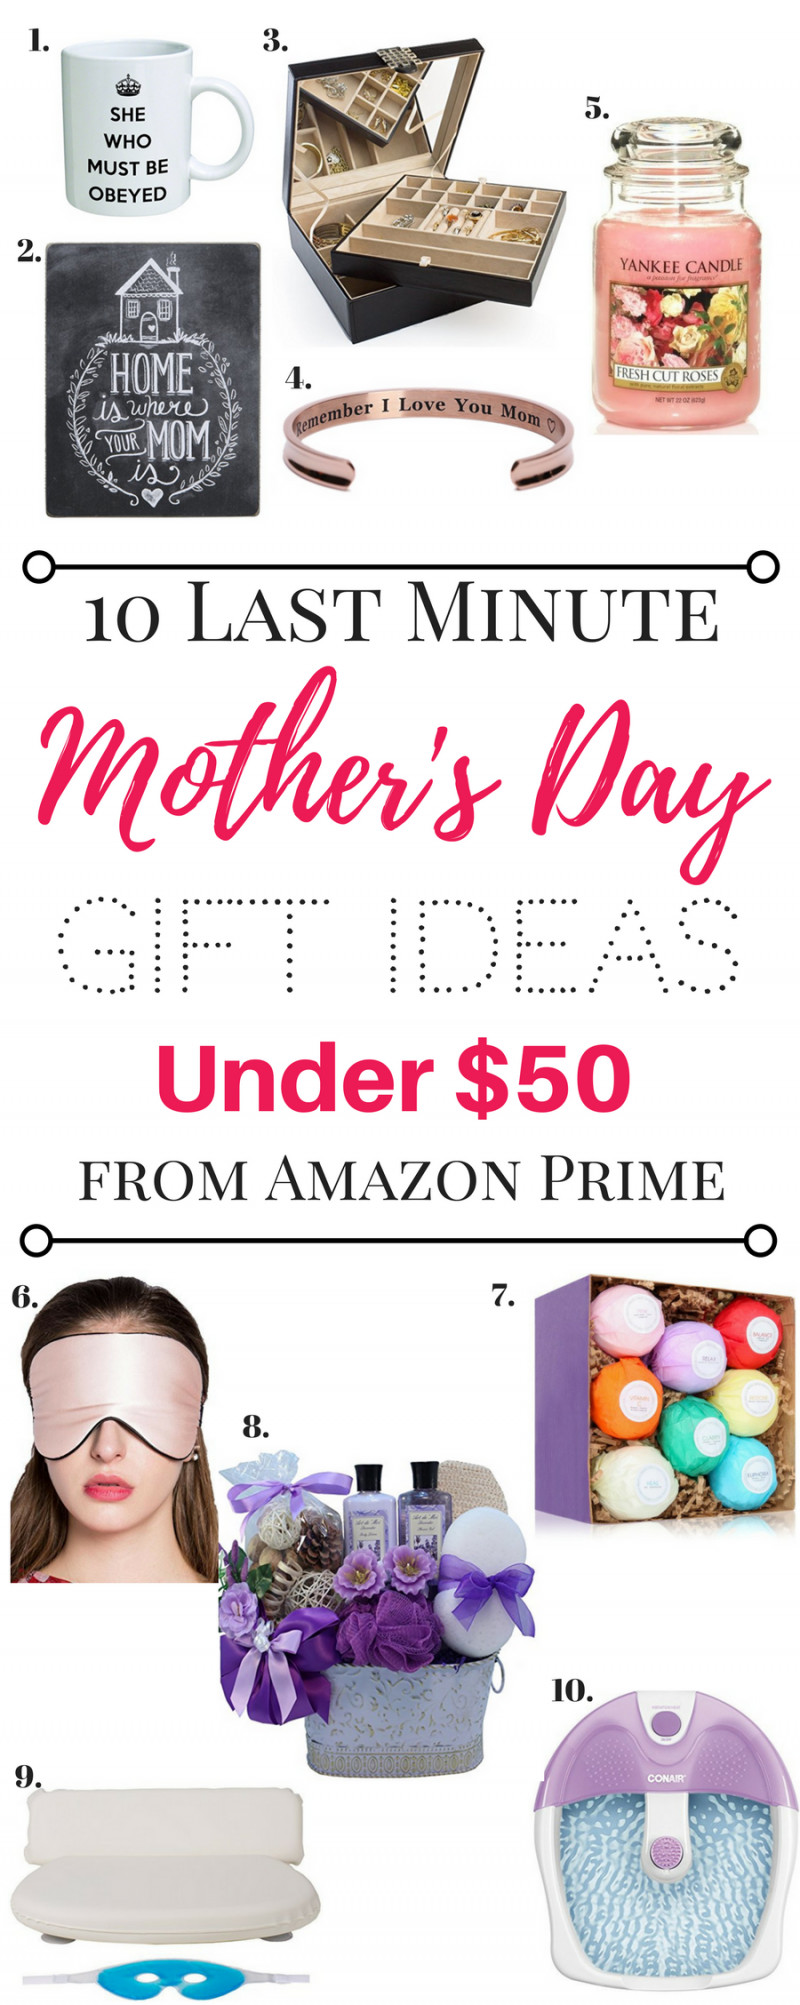 Mother'S Day Gift Ideas Amazon
 Last Minute Mother s Day Gift Ideas Under $50 from Amazon